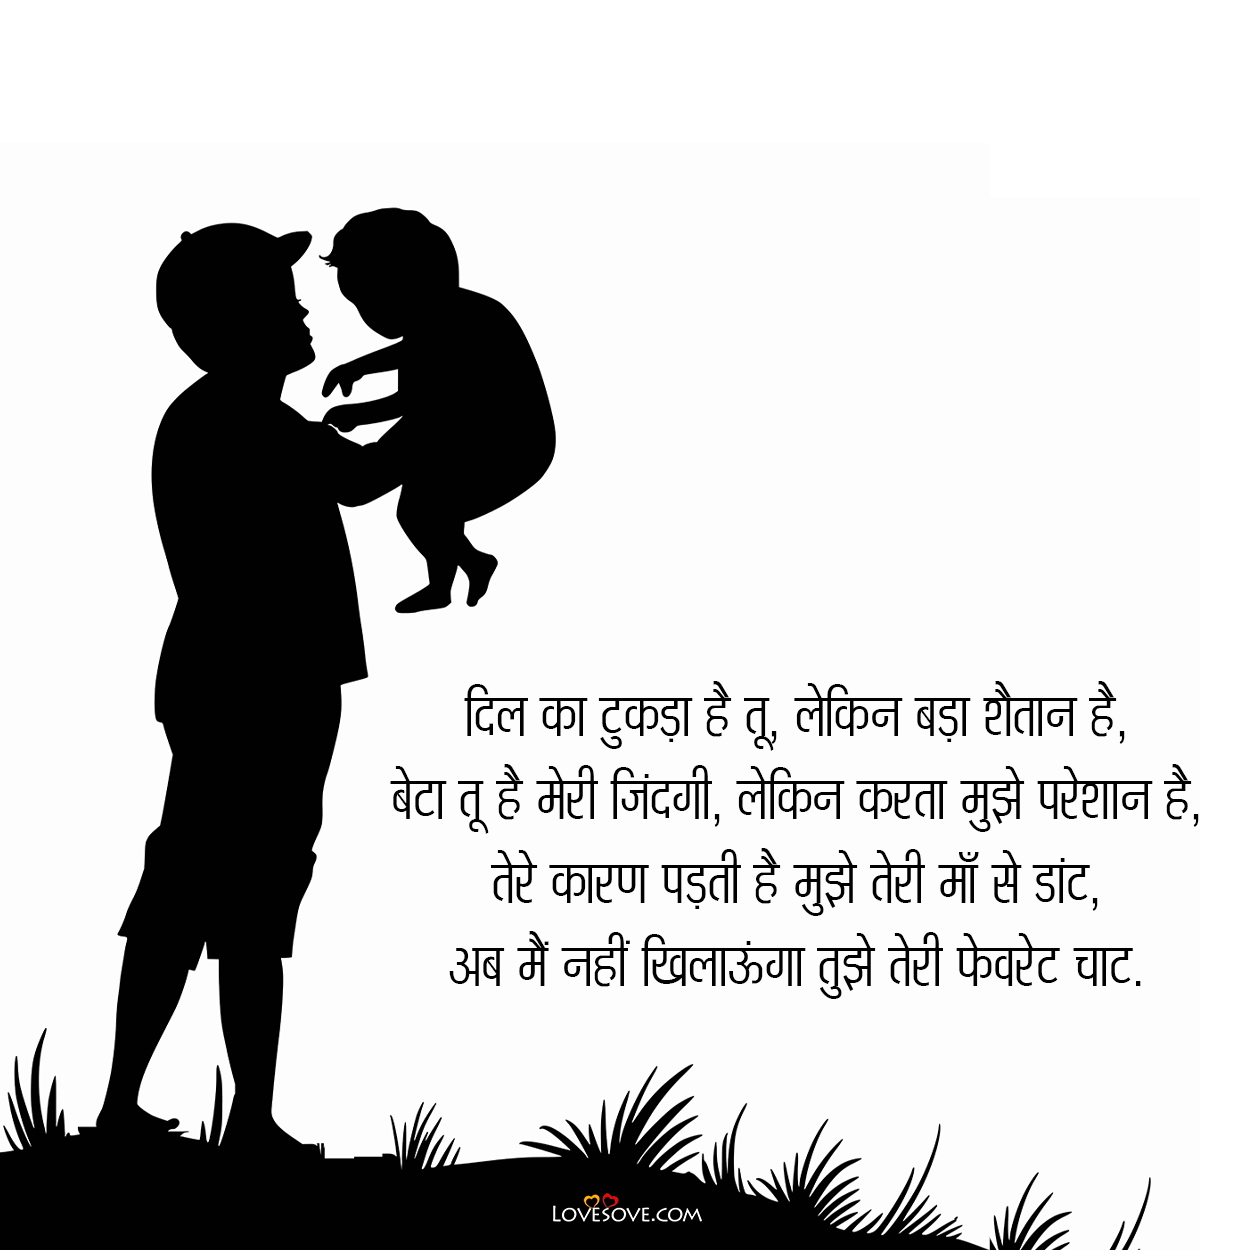 father son quotes in hindi, interesting father son quotes in hindi